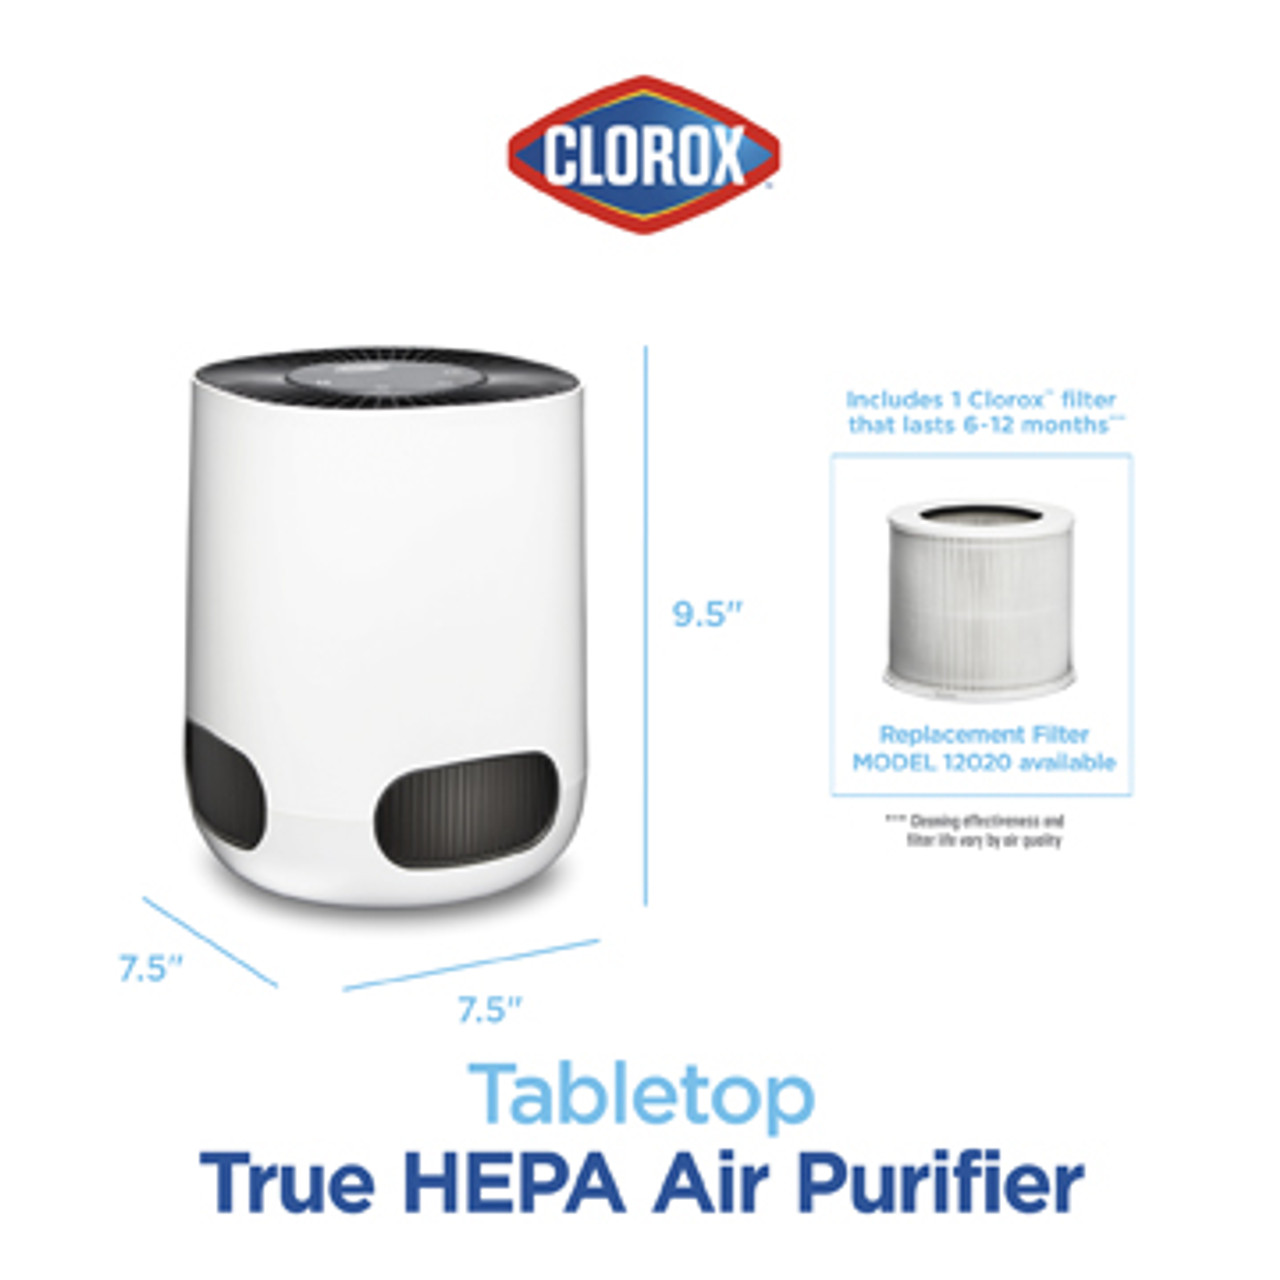 Clorox Tabletop True HEPA Air Purifier product dimensions. 9.5 inches tall, 7.5 inches wide. Replacement filter, model 12020